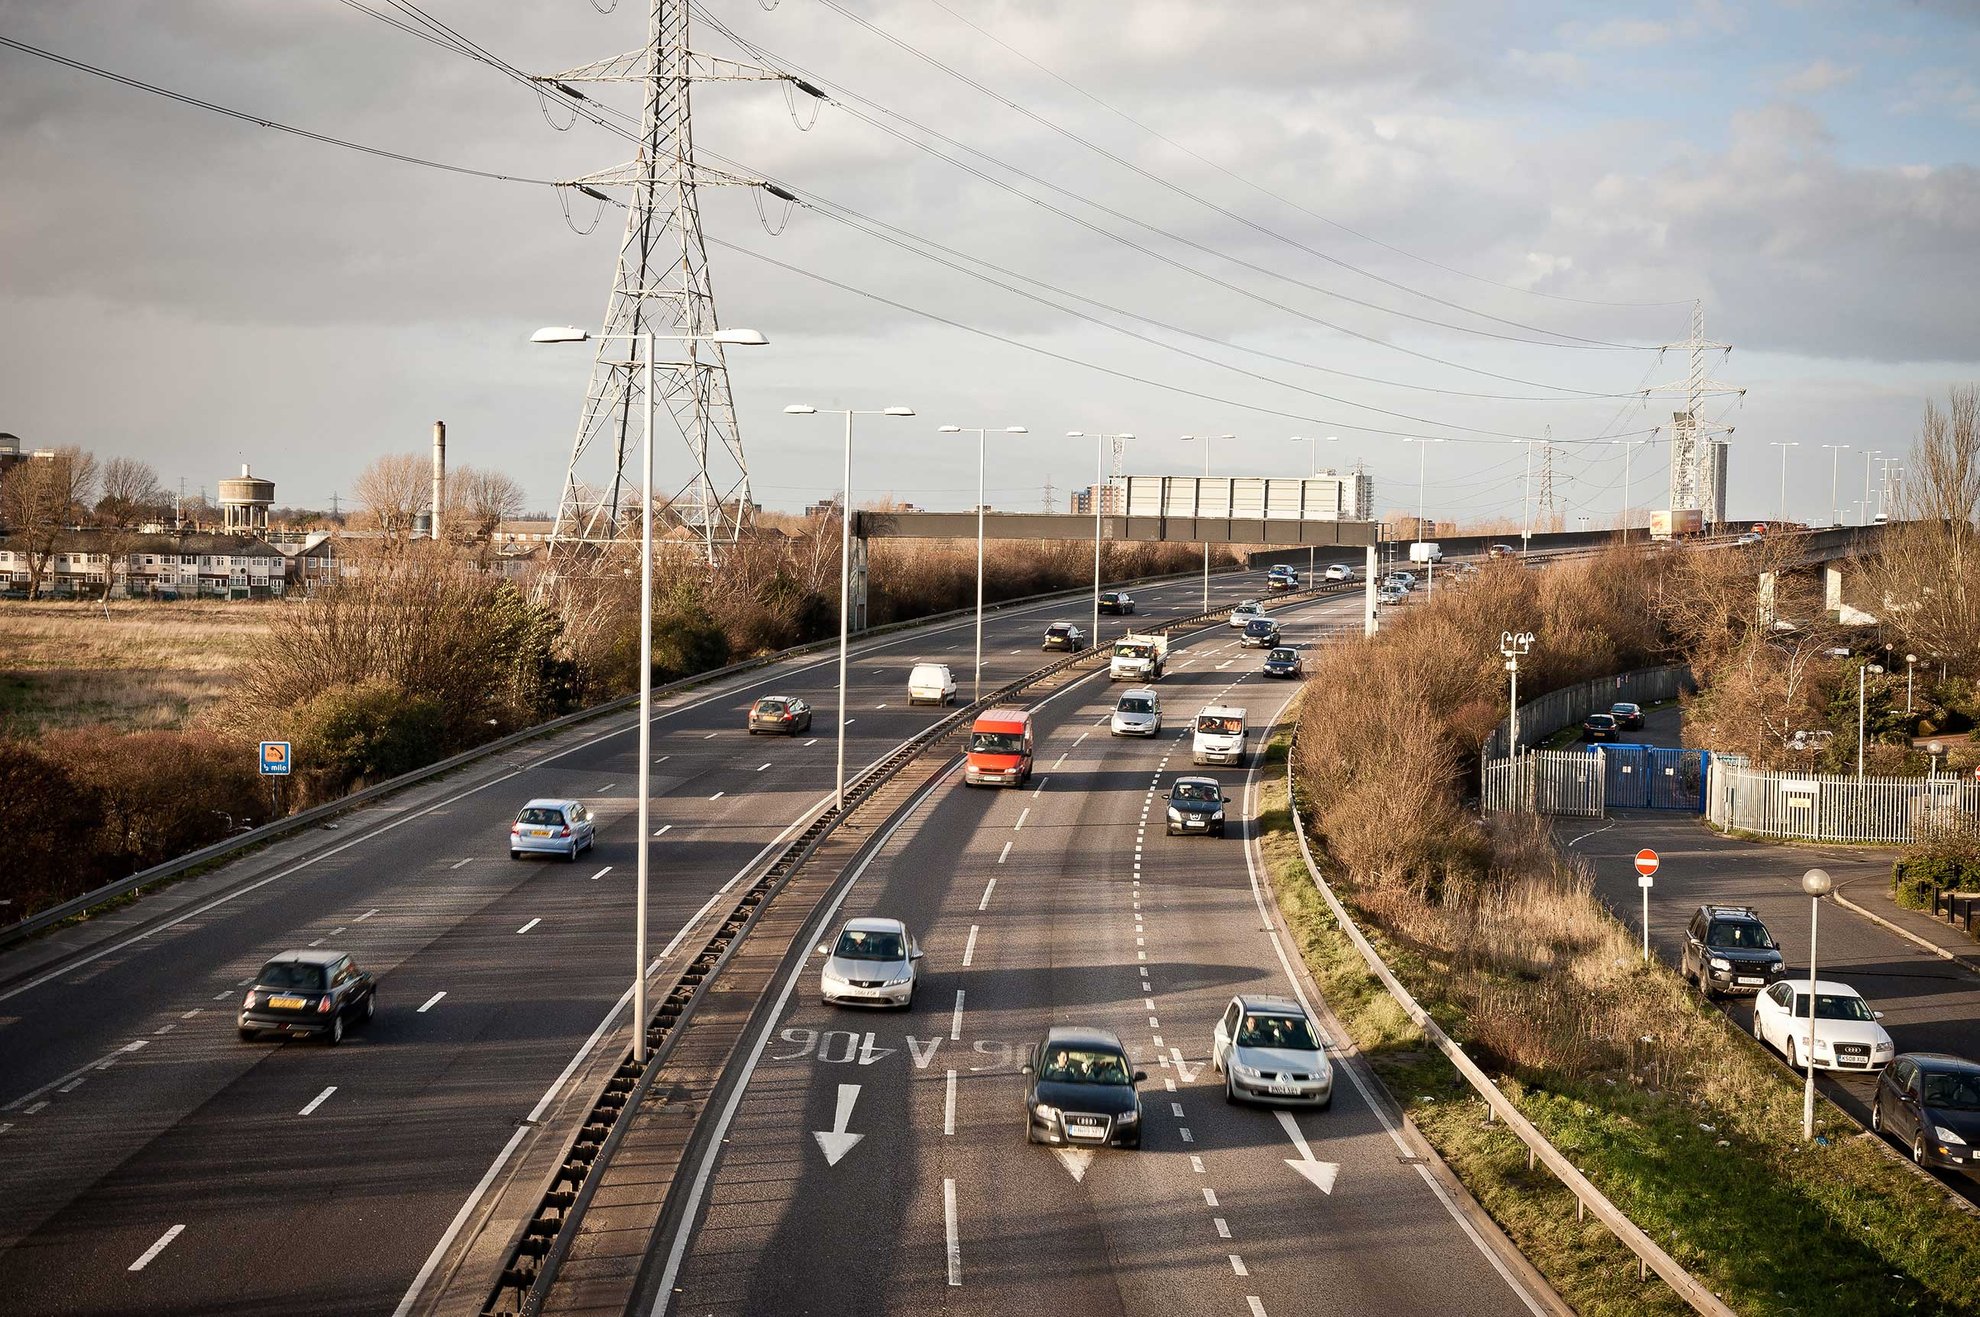 The North Circular Road – from the footbridge between Barking and East Ham